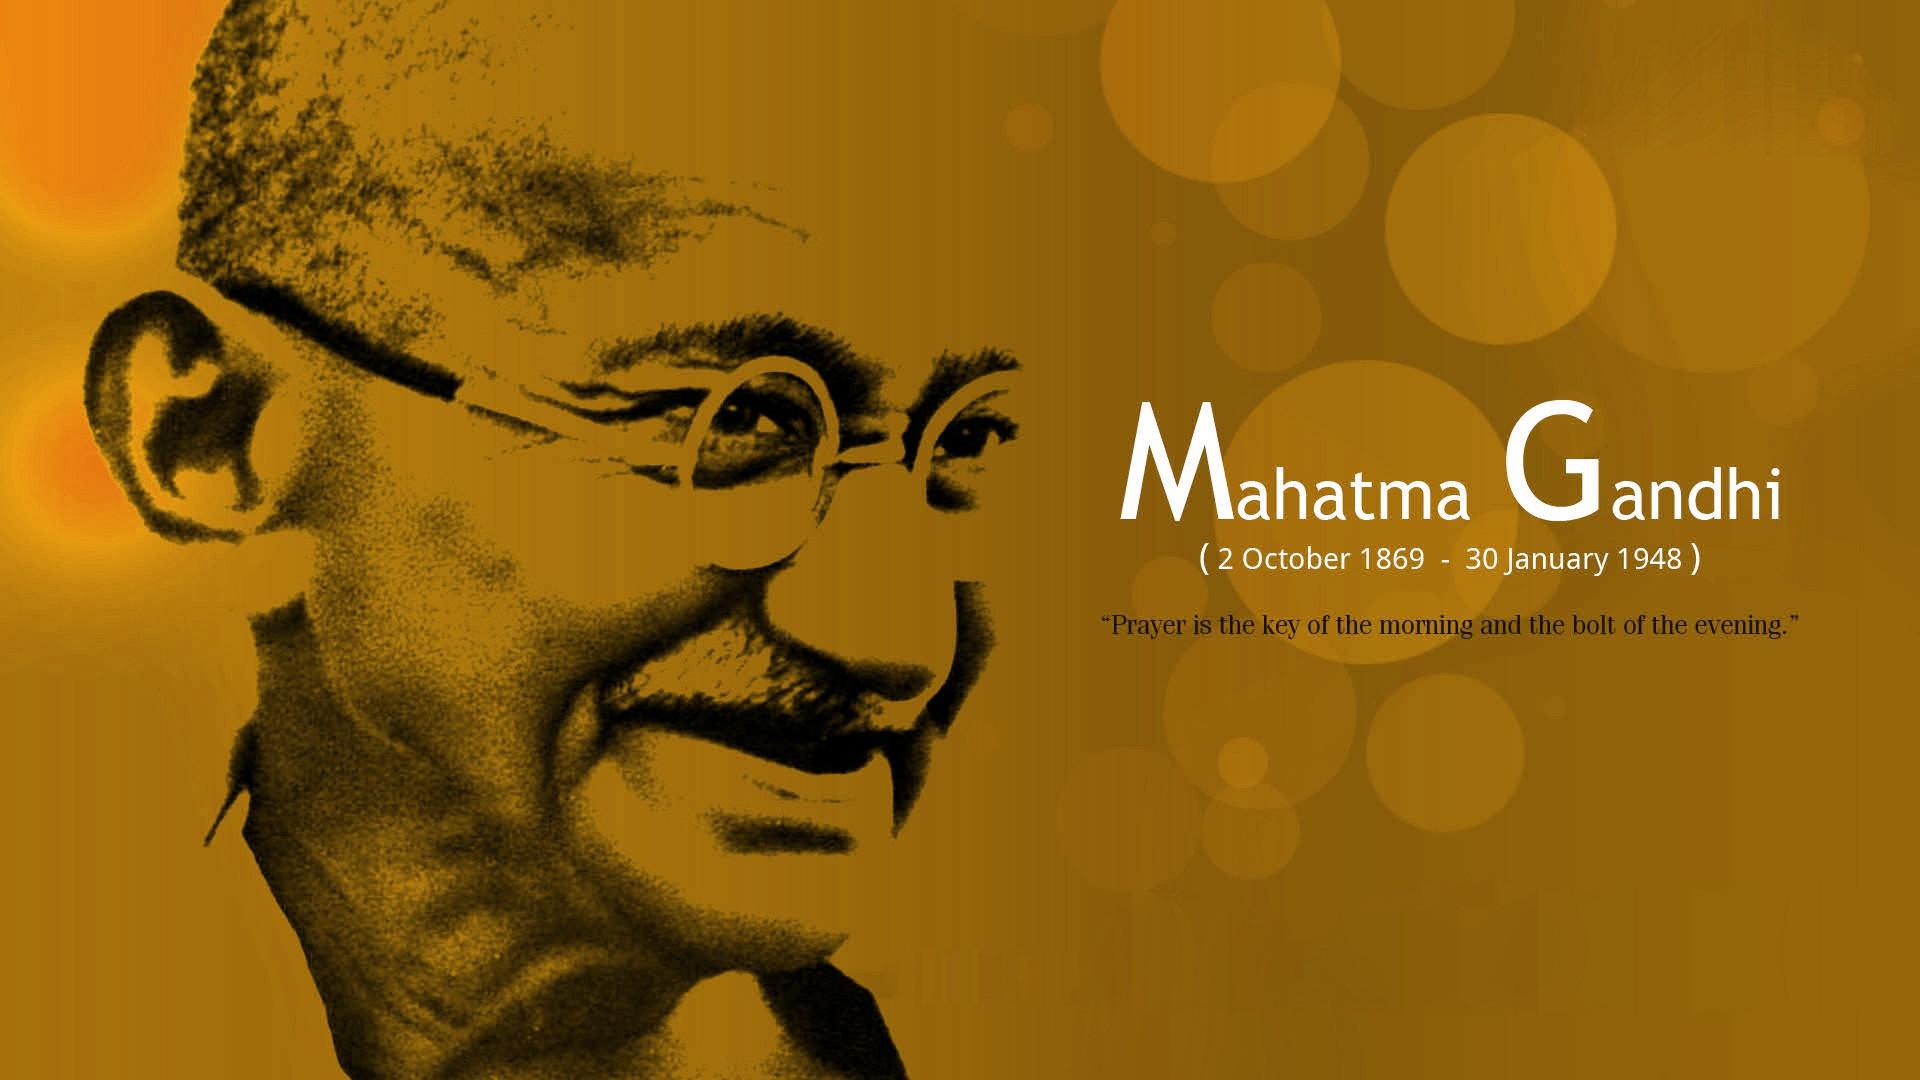 Happy Gandhi Jayanthi Image, Quotes by Father of Nation